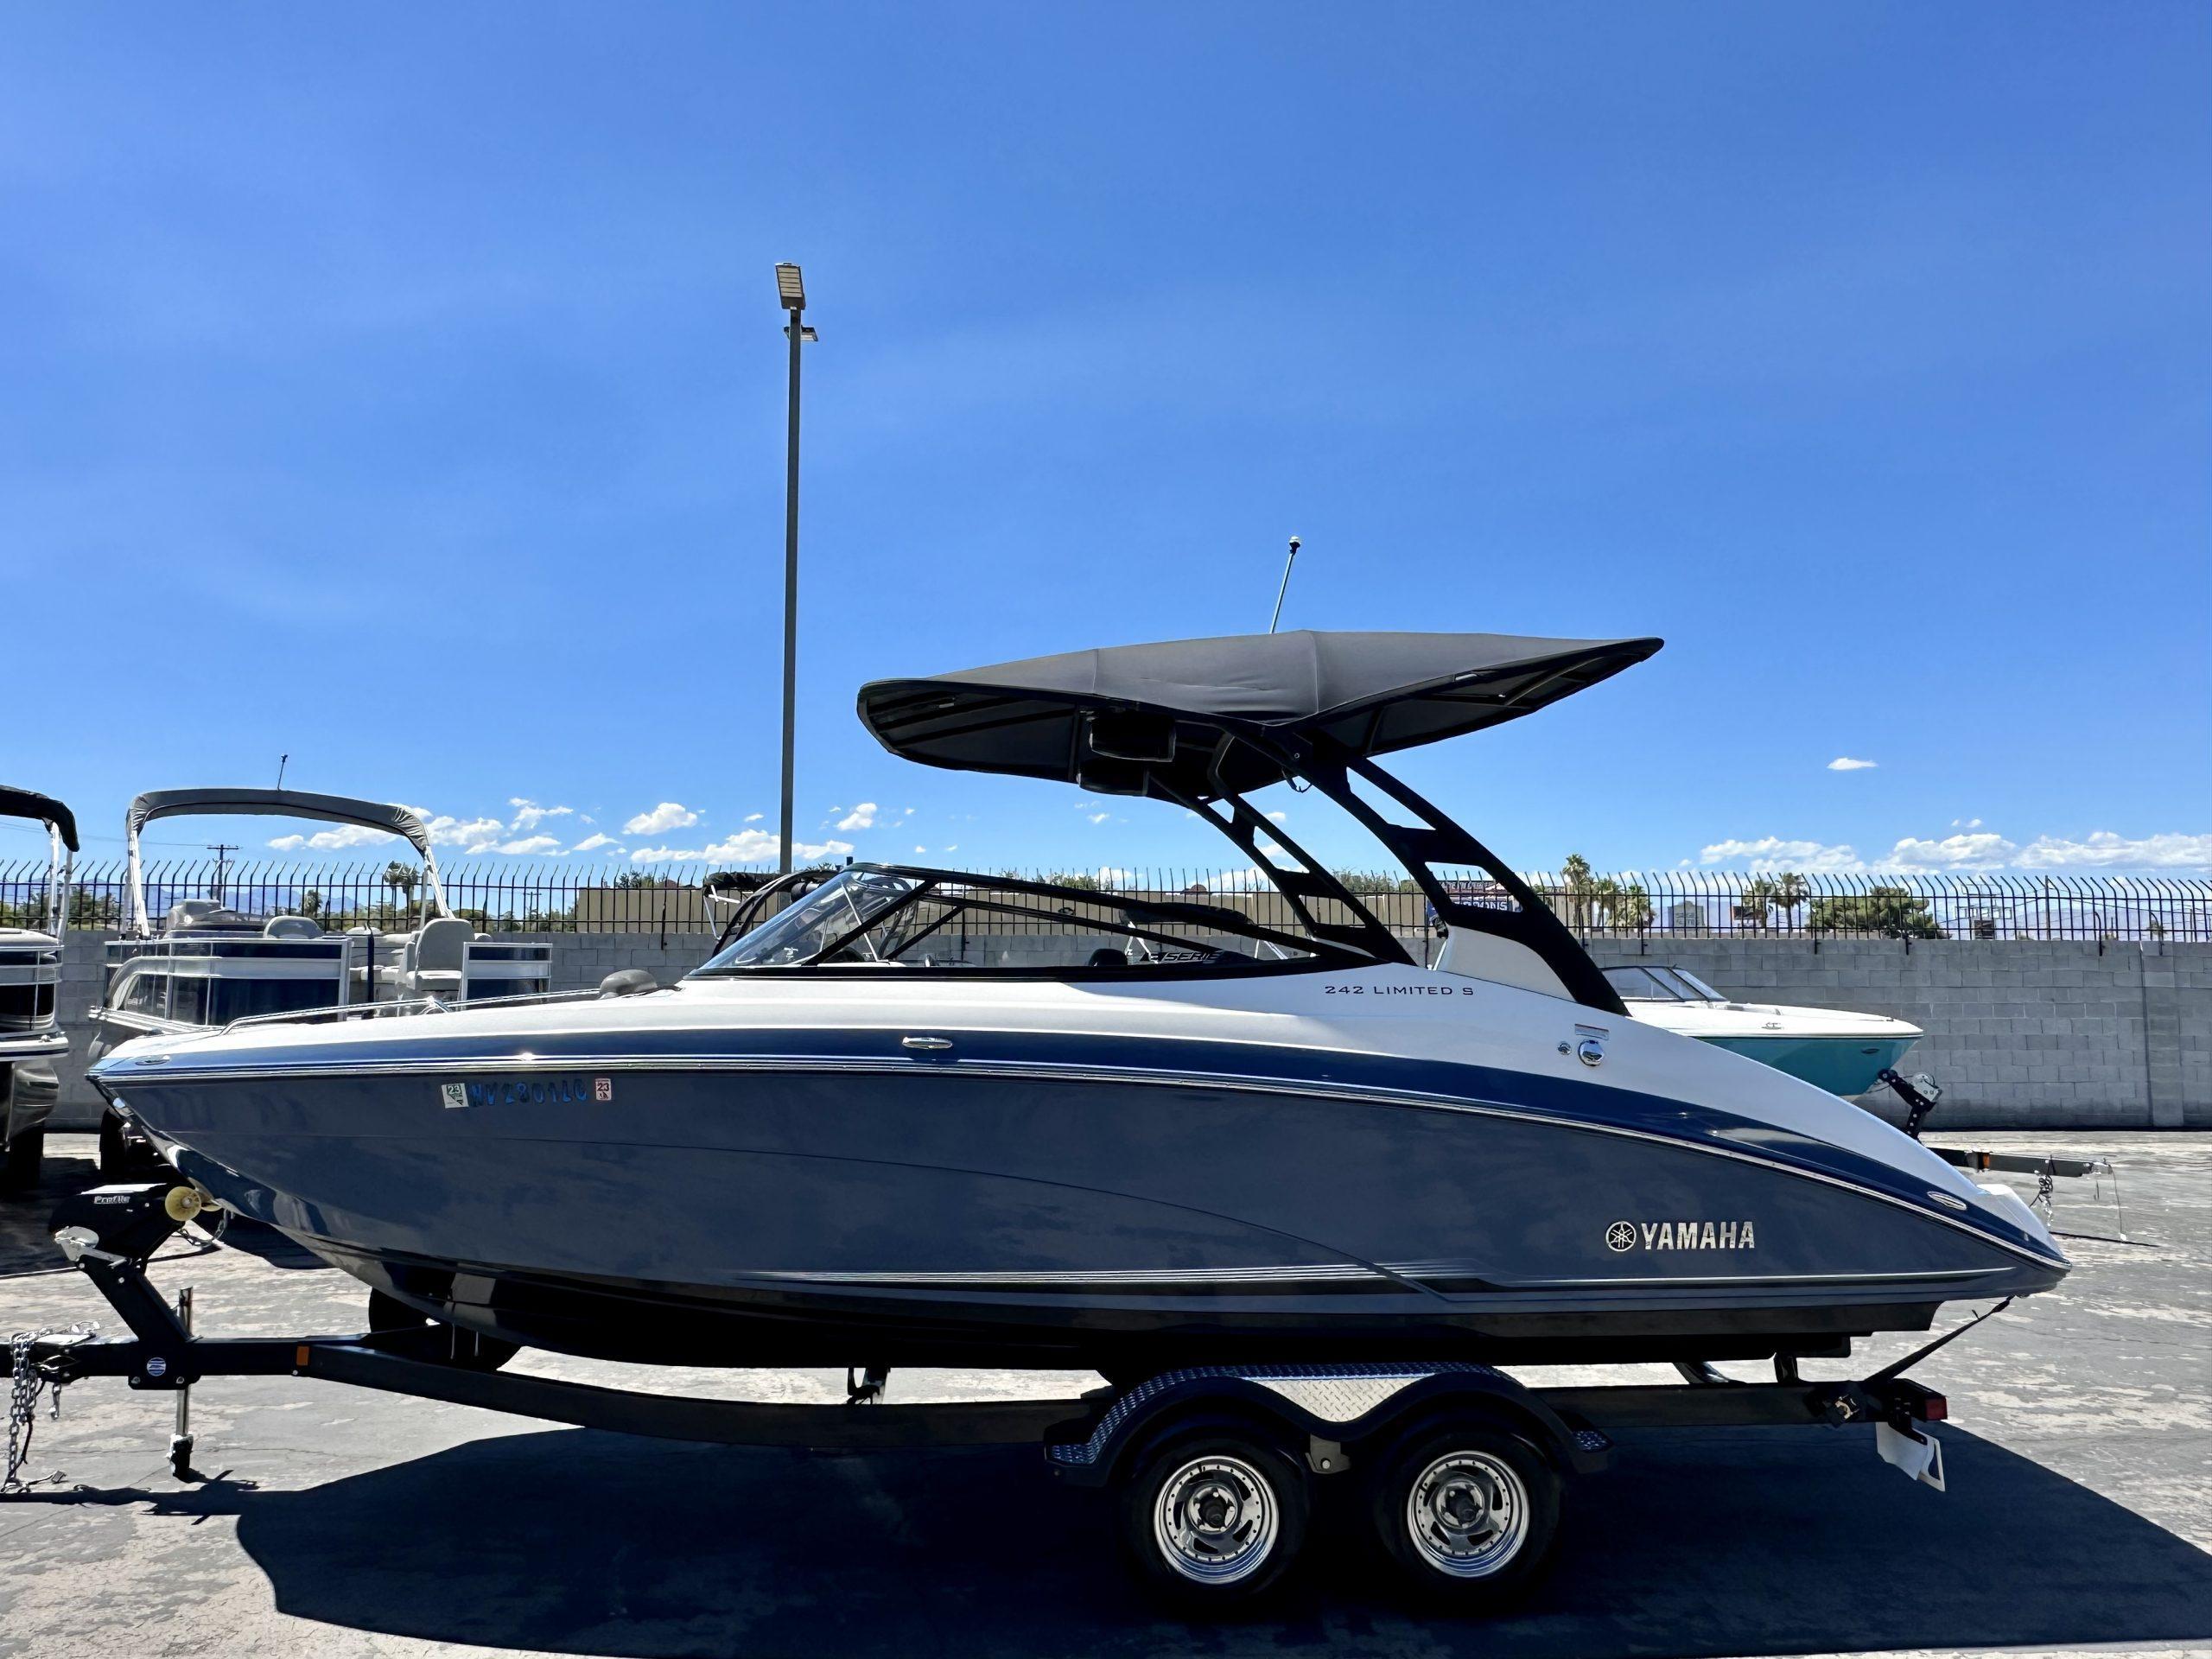 Yamaha Boats 242 Limited S for sale 